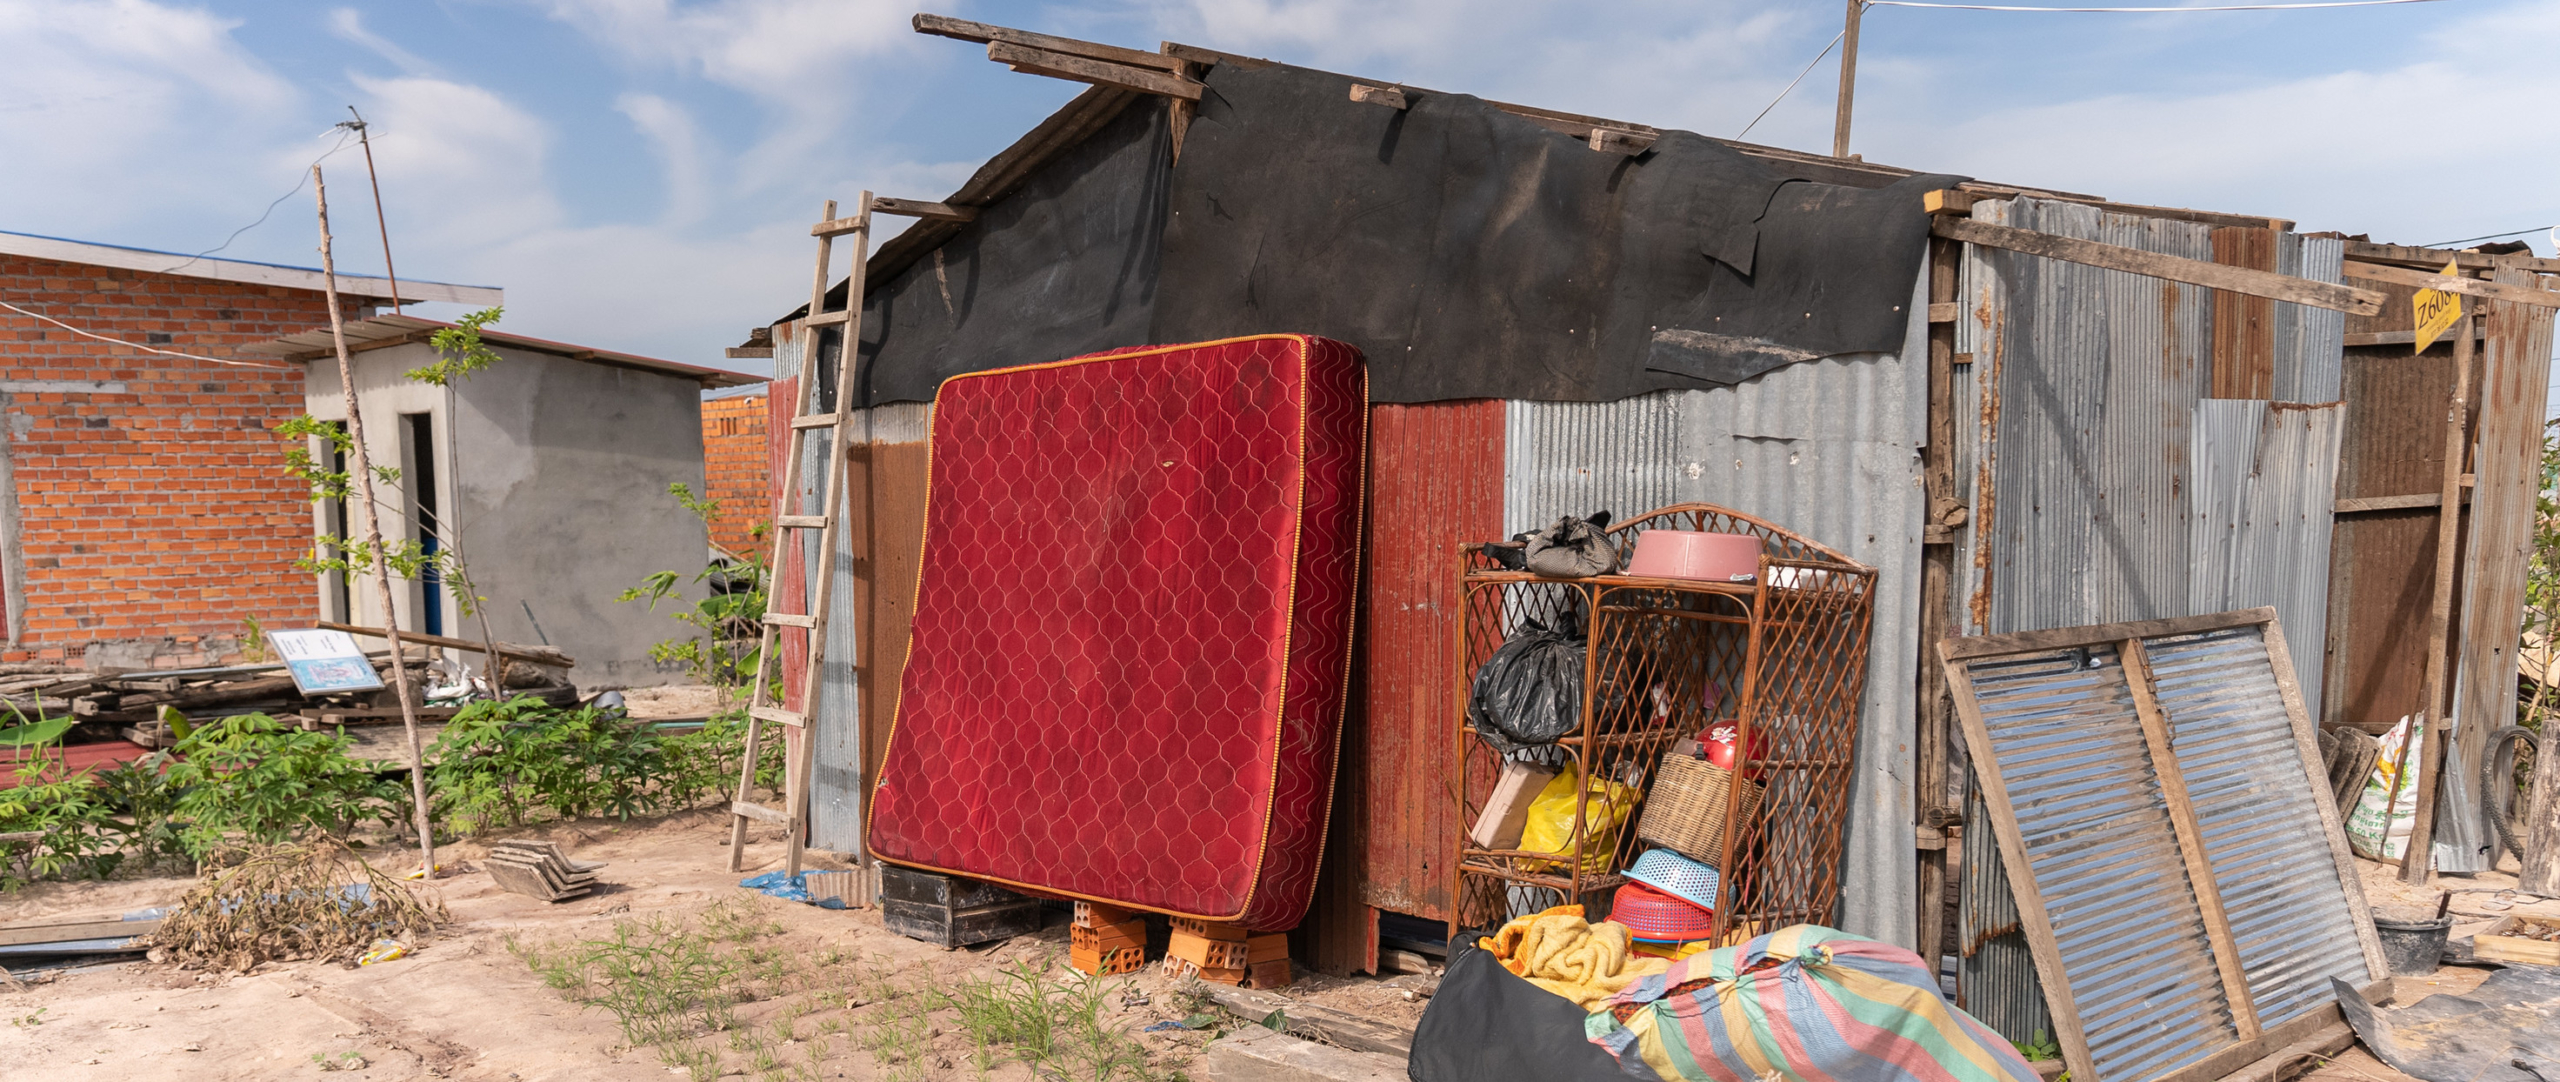 In this image taken in July 2023, residents’ belongings are seen drying in the sun after a violent storm and flood that happened the week before this image was taken at the Run Ta Ek resettlement site in Siem Reap, Cambodia.